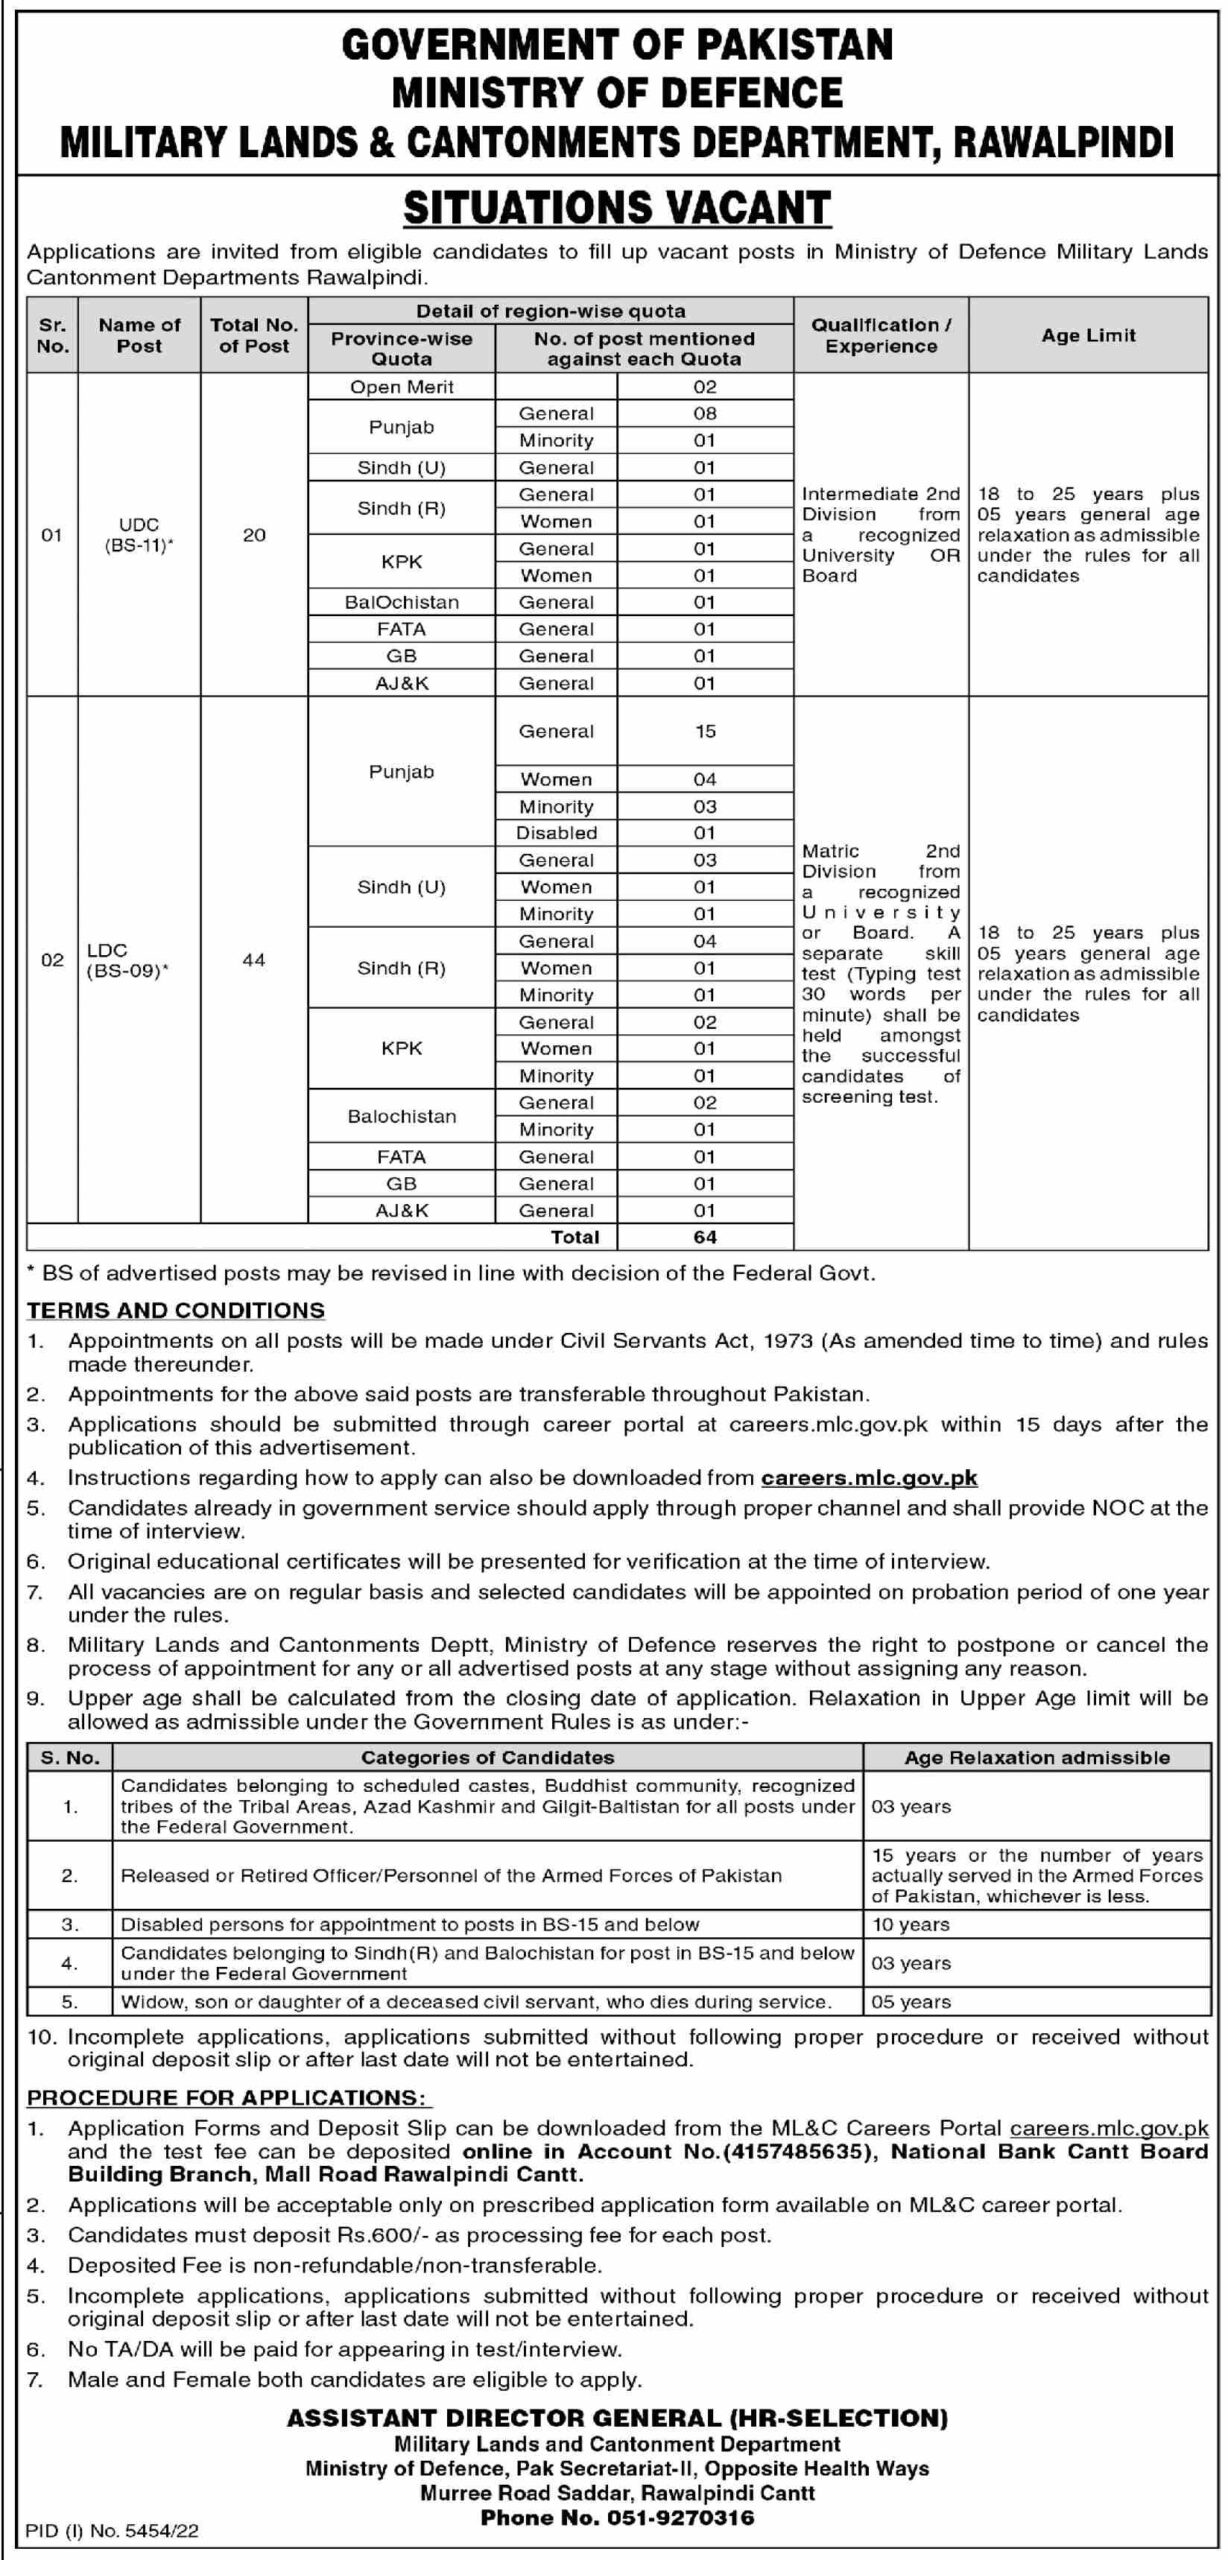 Ministry of Defence Military Lands & Cantonments Department Rawalpindi Jobs 2023